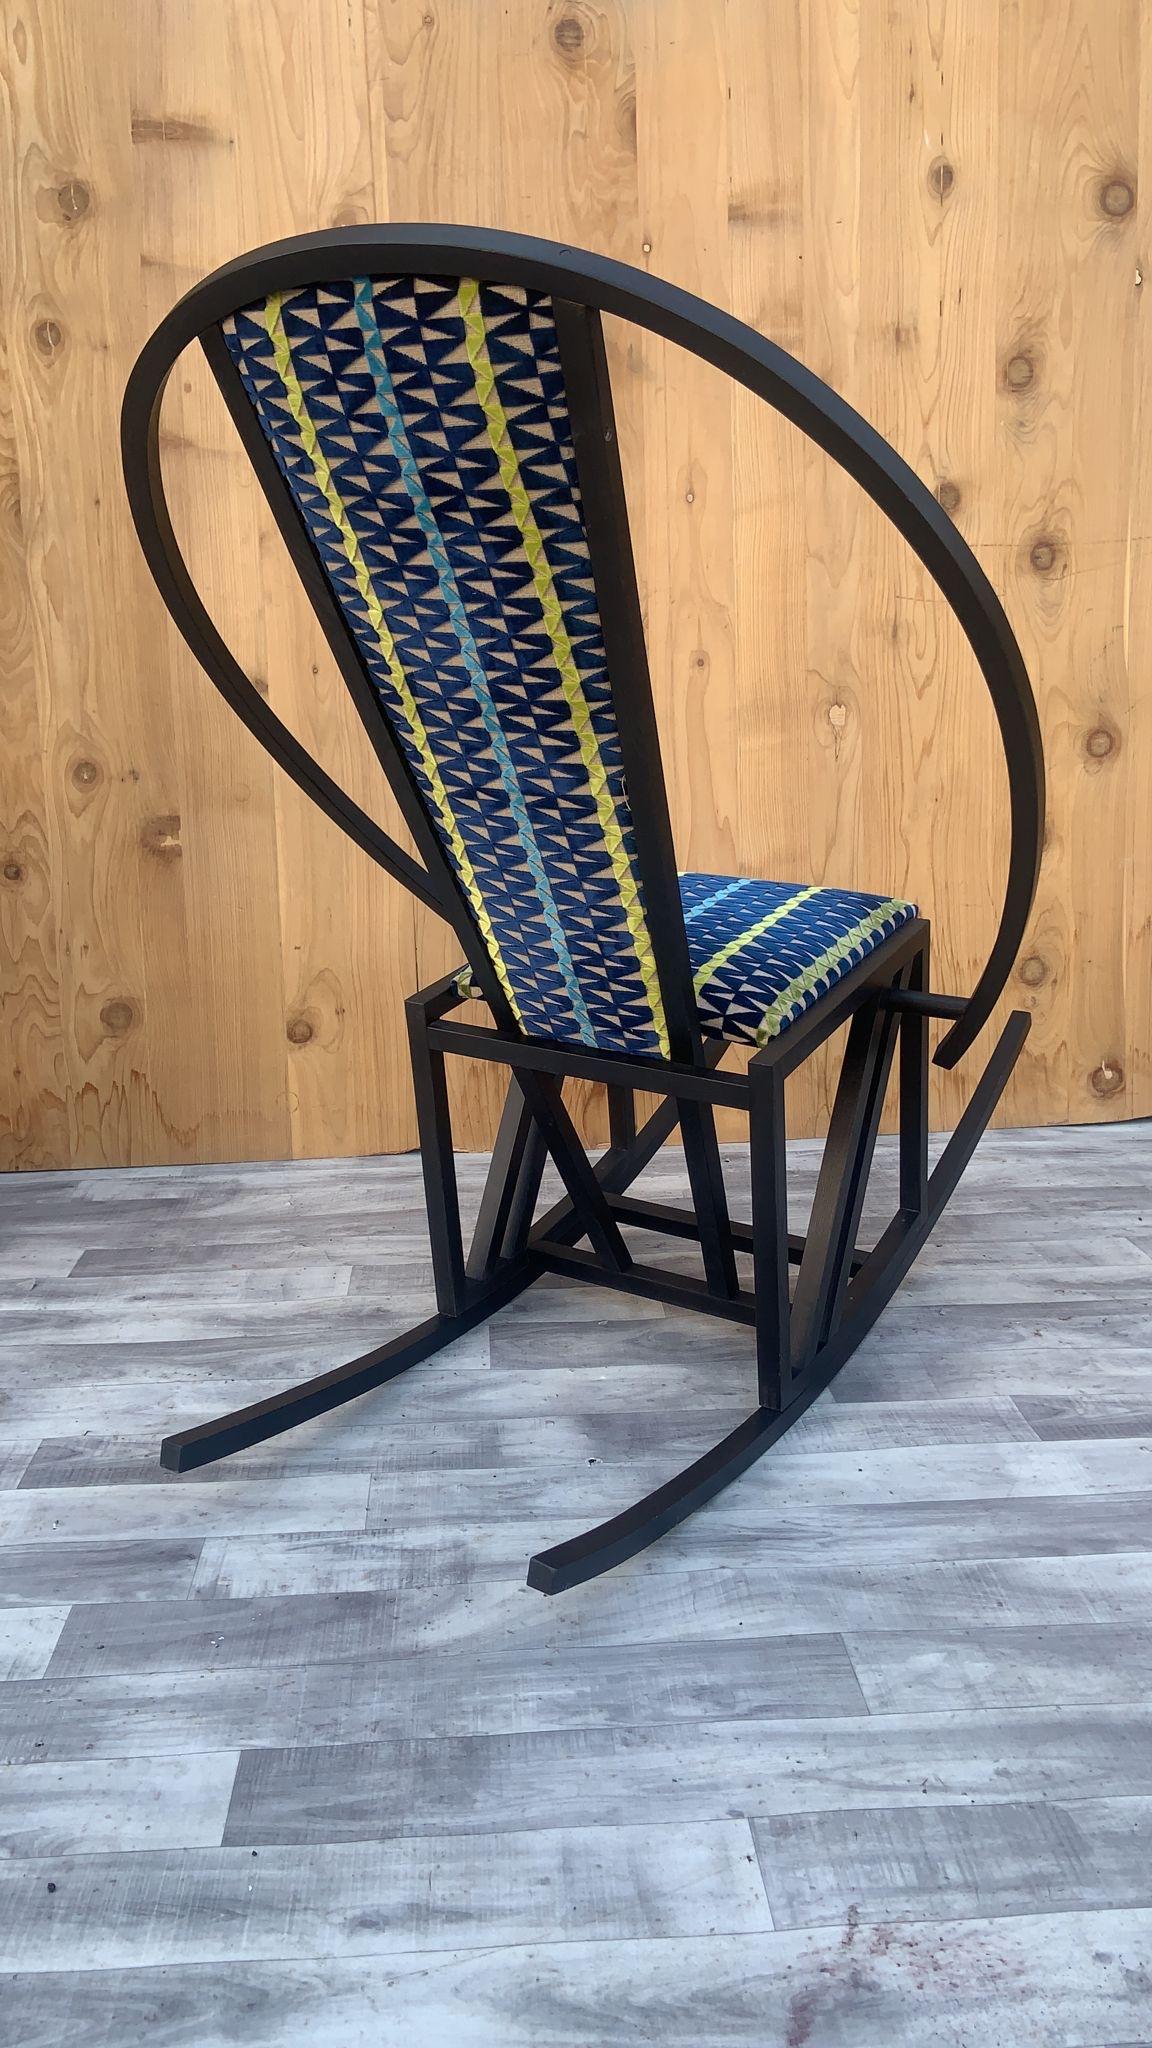 Vintage Pascal Mourgue Style Rocking Chair Newly Upholstered in Knoll Fabric

This Pascal Mourgue Style Rocking Chair is crafted from birch. The birch has been stained and we have newly upholstered the seat in a plush Knoll towel fabric. This